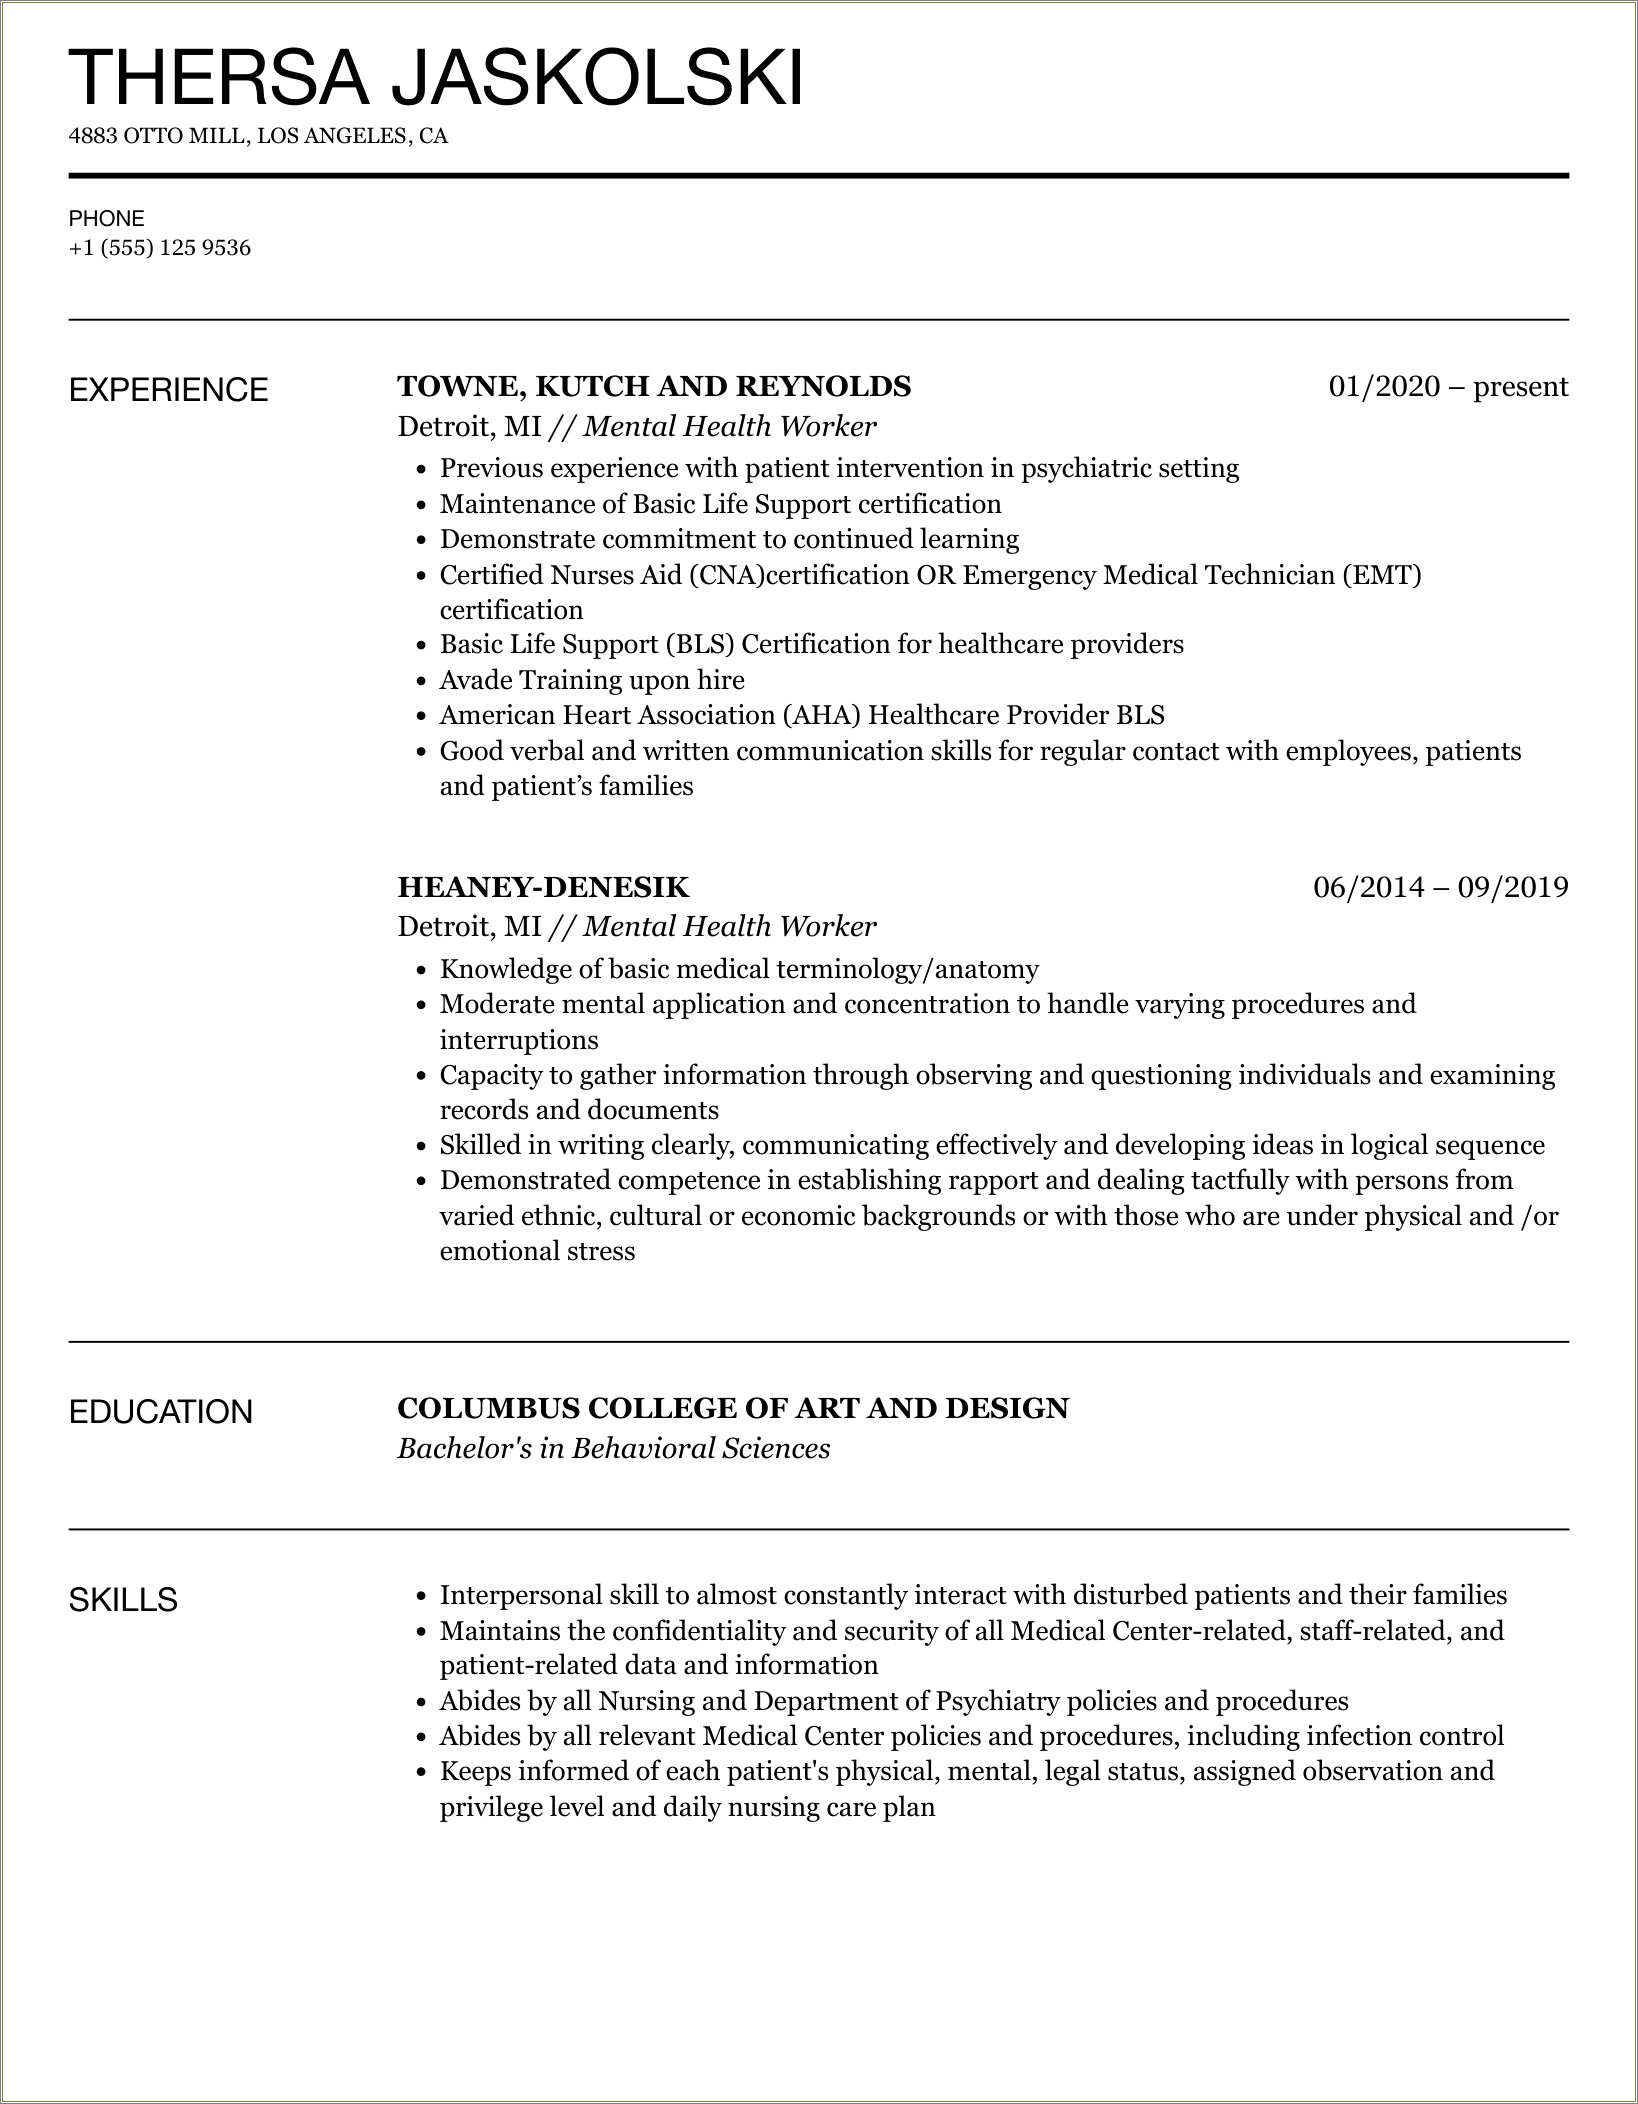 Best Resume Additional Skills For Mental Health Services